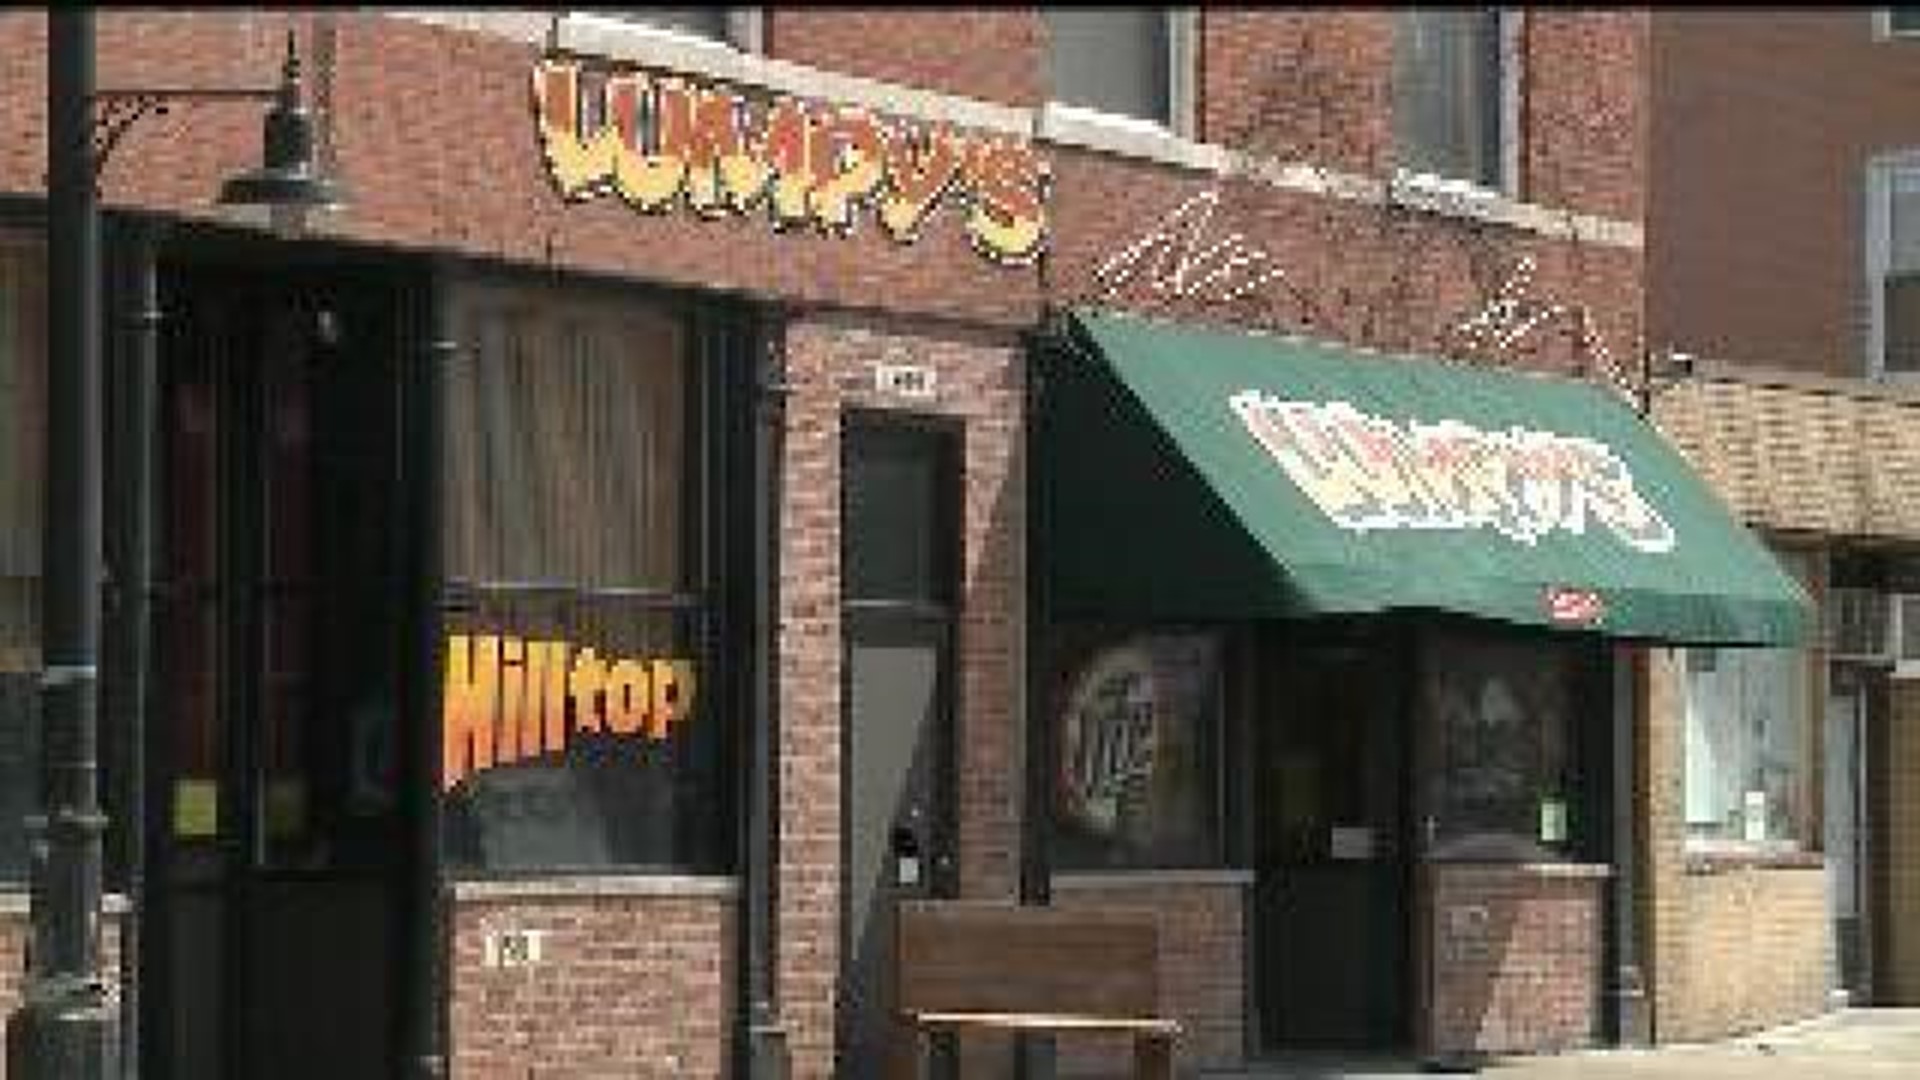 Fire at Lumpy's in Davenport